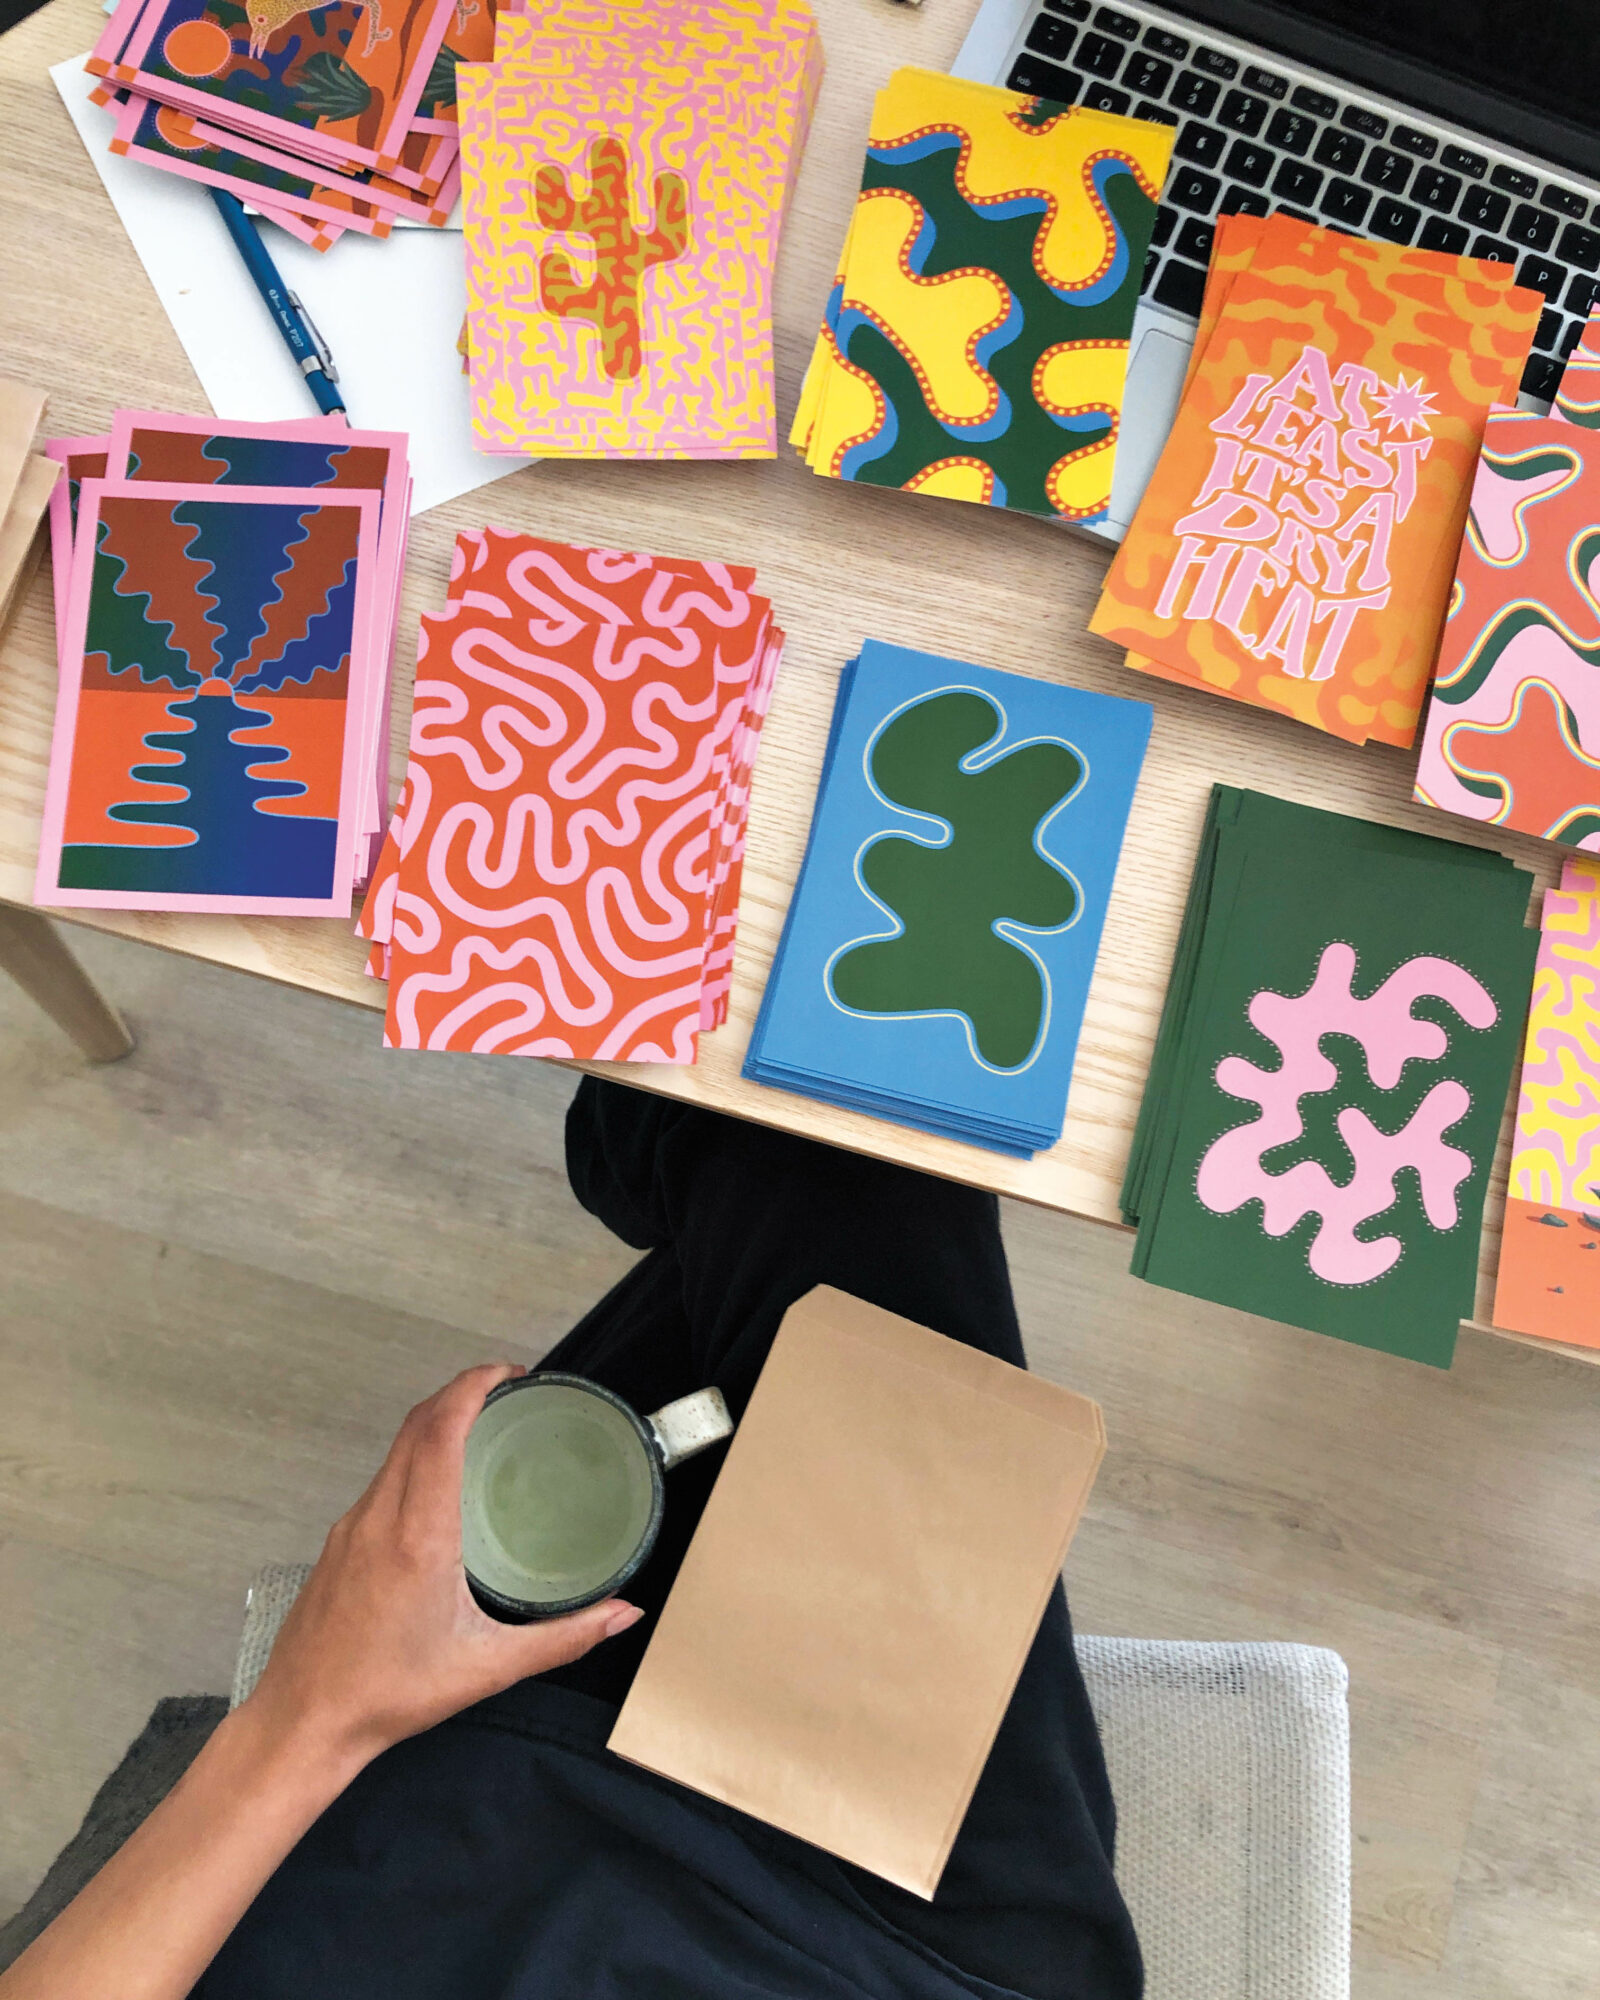 Stacks of colorful abstract art prints on a wood table